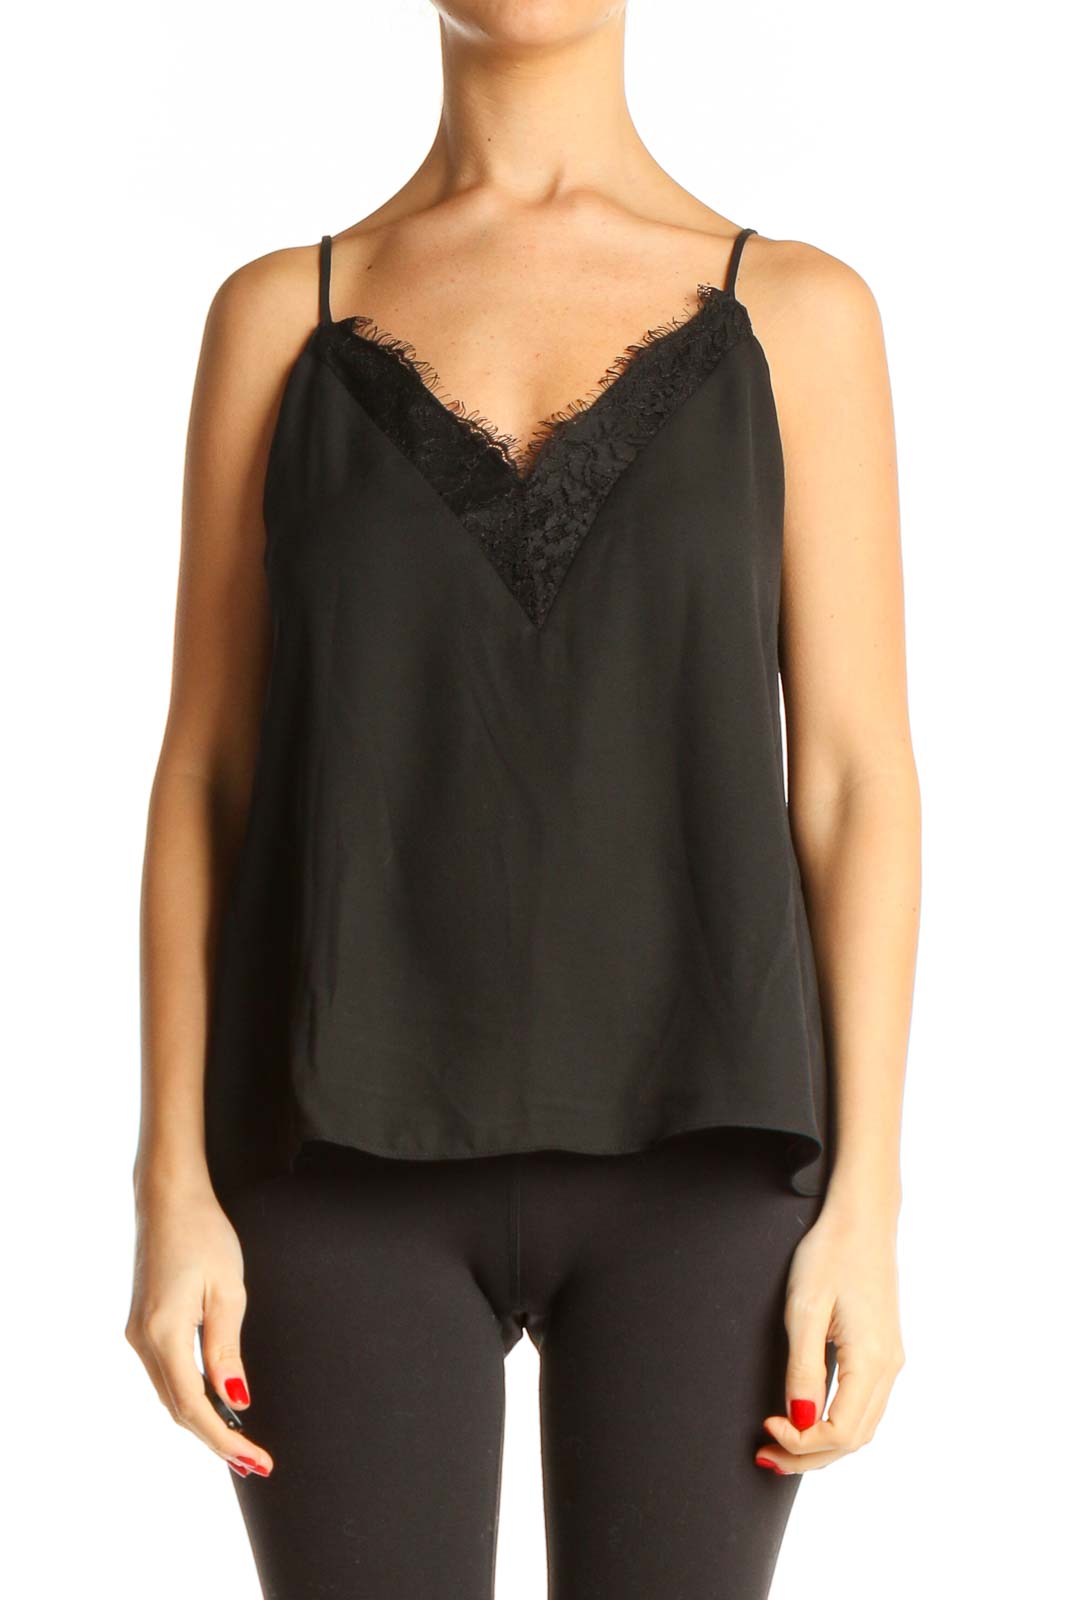 Black Lace Chic Top Front